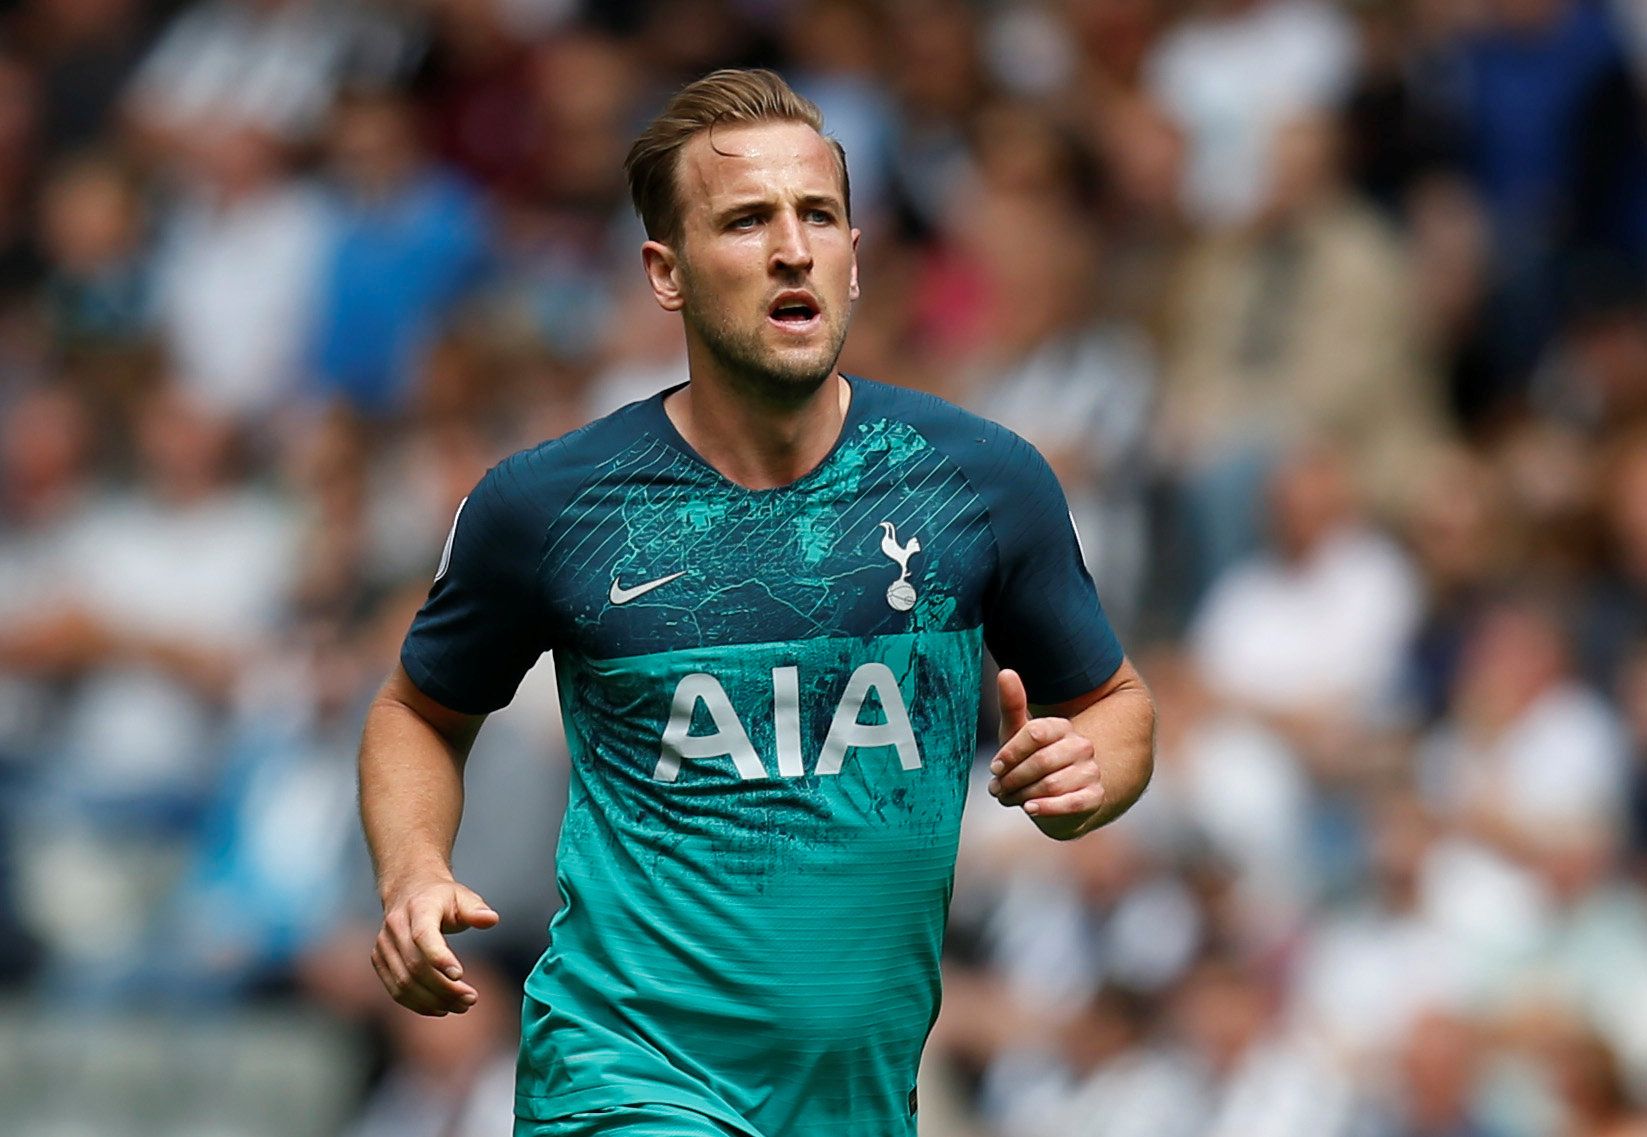 Soccer Football - Premier League - Newcastle United v Tottenham Hotspur - St James' Park, Newcastle, Britain - August 11, 2018   Tottenham's Harry Kane    Action Images via Reuters/Ed Sykes    EDITORIAL USE ONLY. No use with unauthorized audio, video, data, fixture lists, club/league logos or "live" services. Online in-match use limited to 75 images, no video emulation. No use in betting, games or single club/league/player publications.  Please contact your account representative for further det